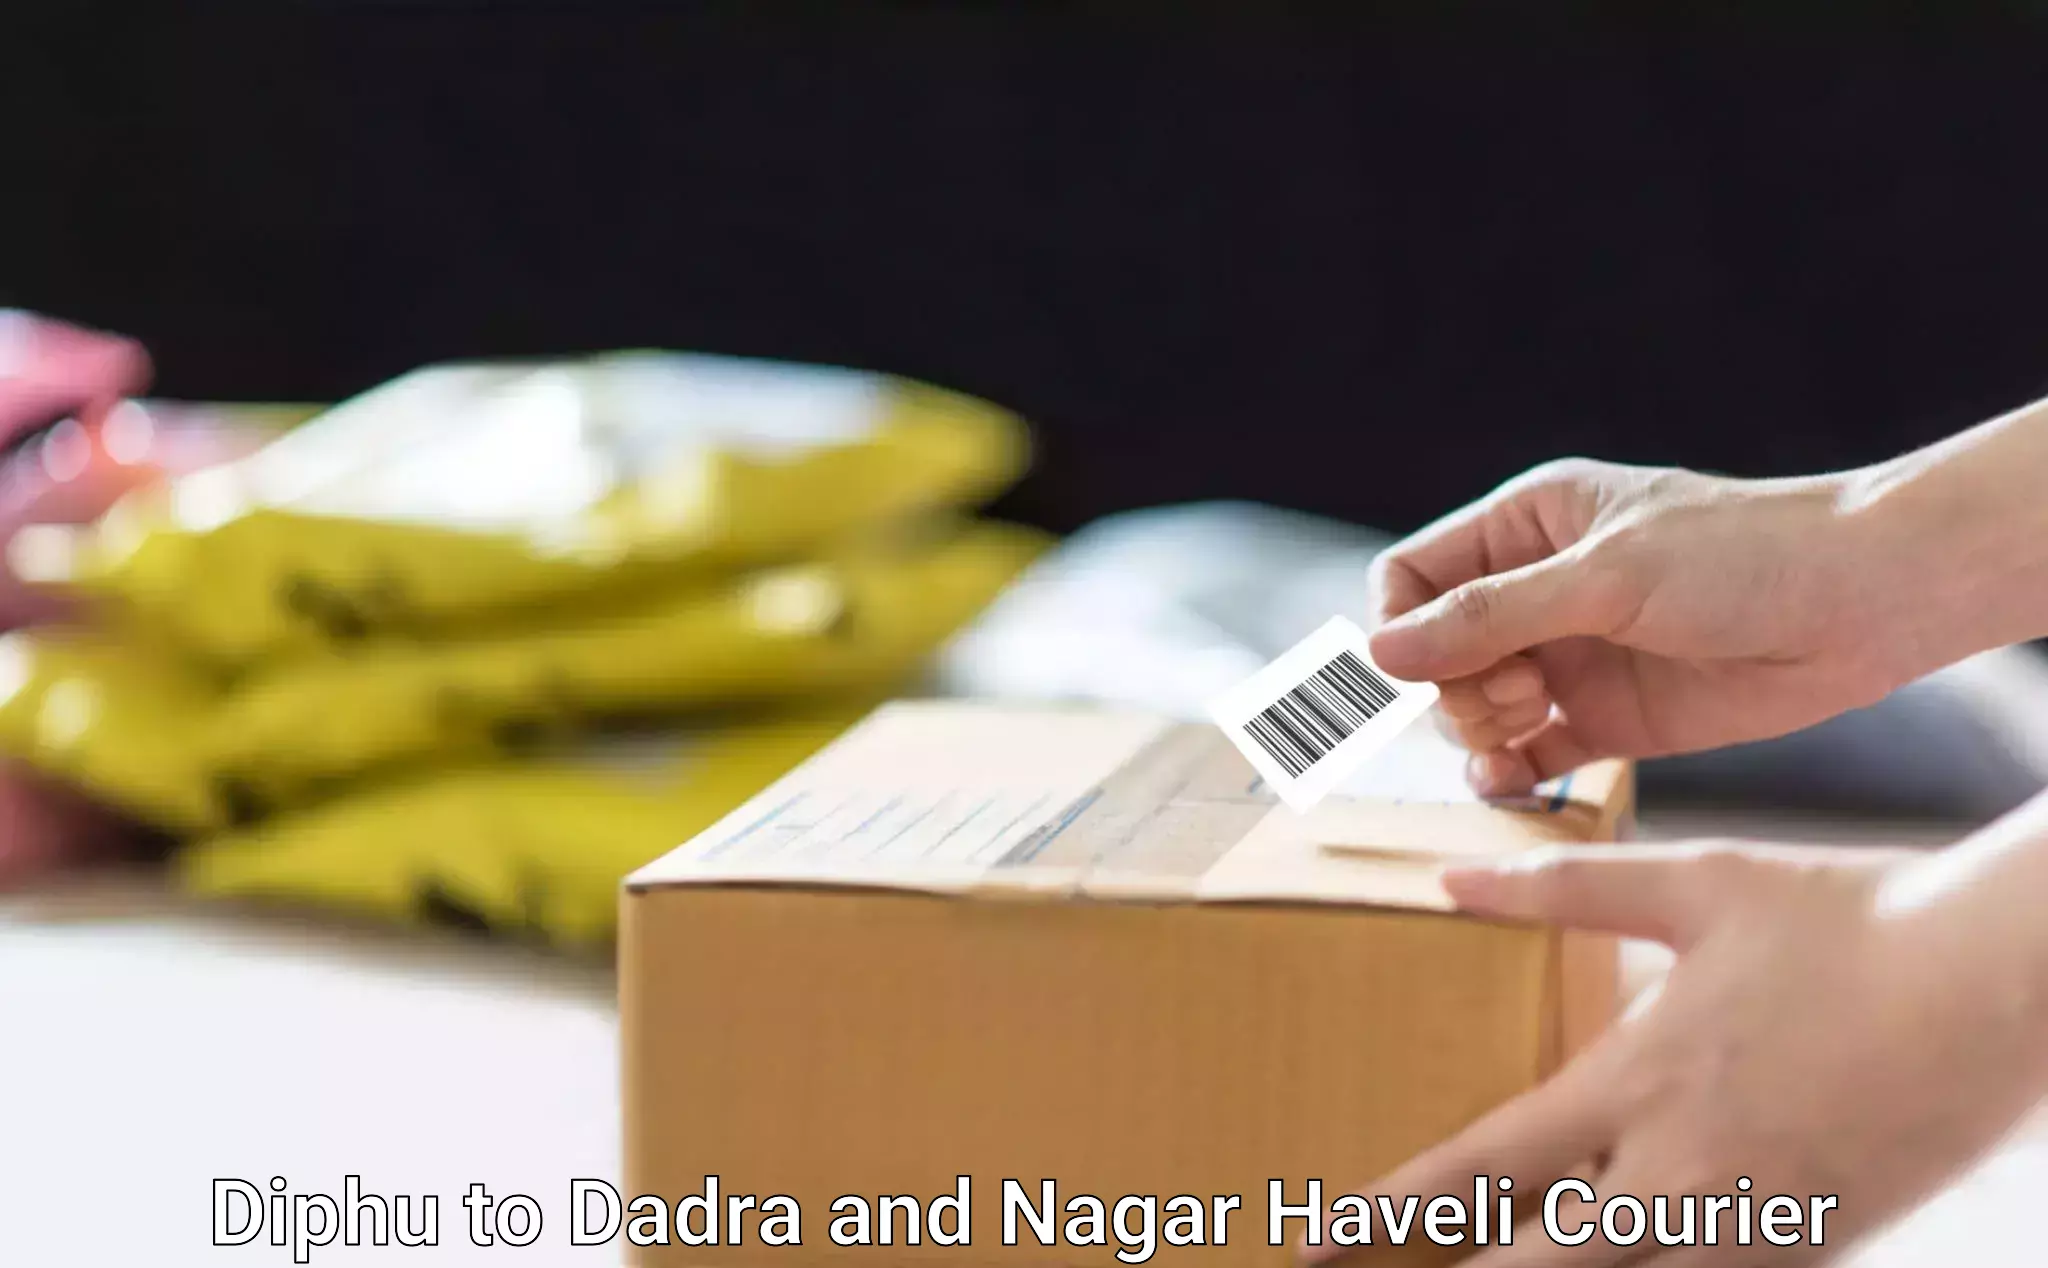 Courier service comparison Diphu to Dadra and Nagar Haveli